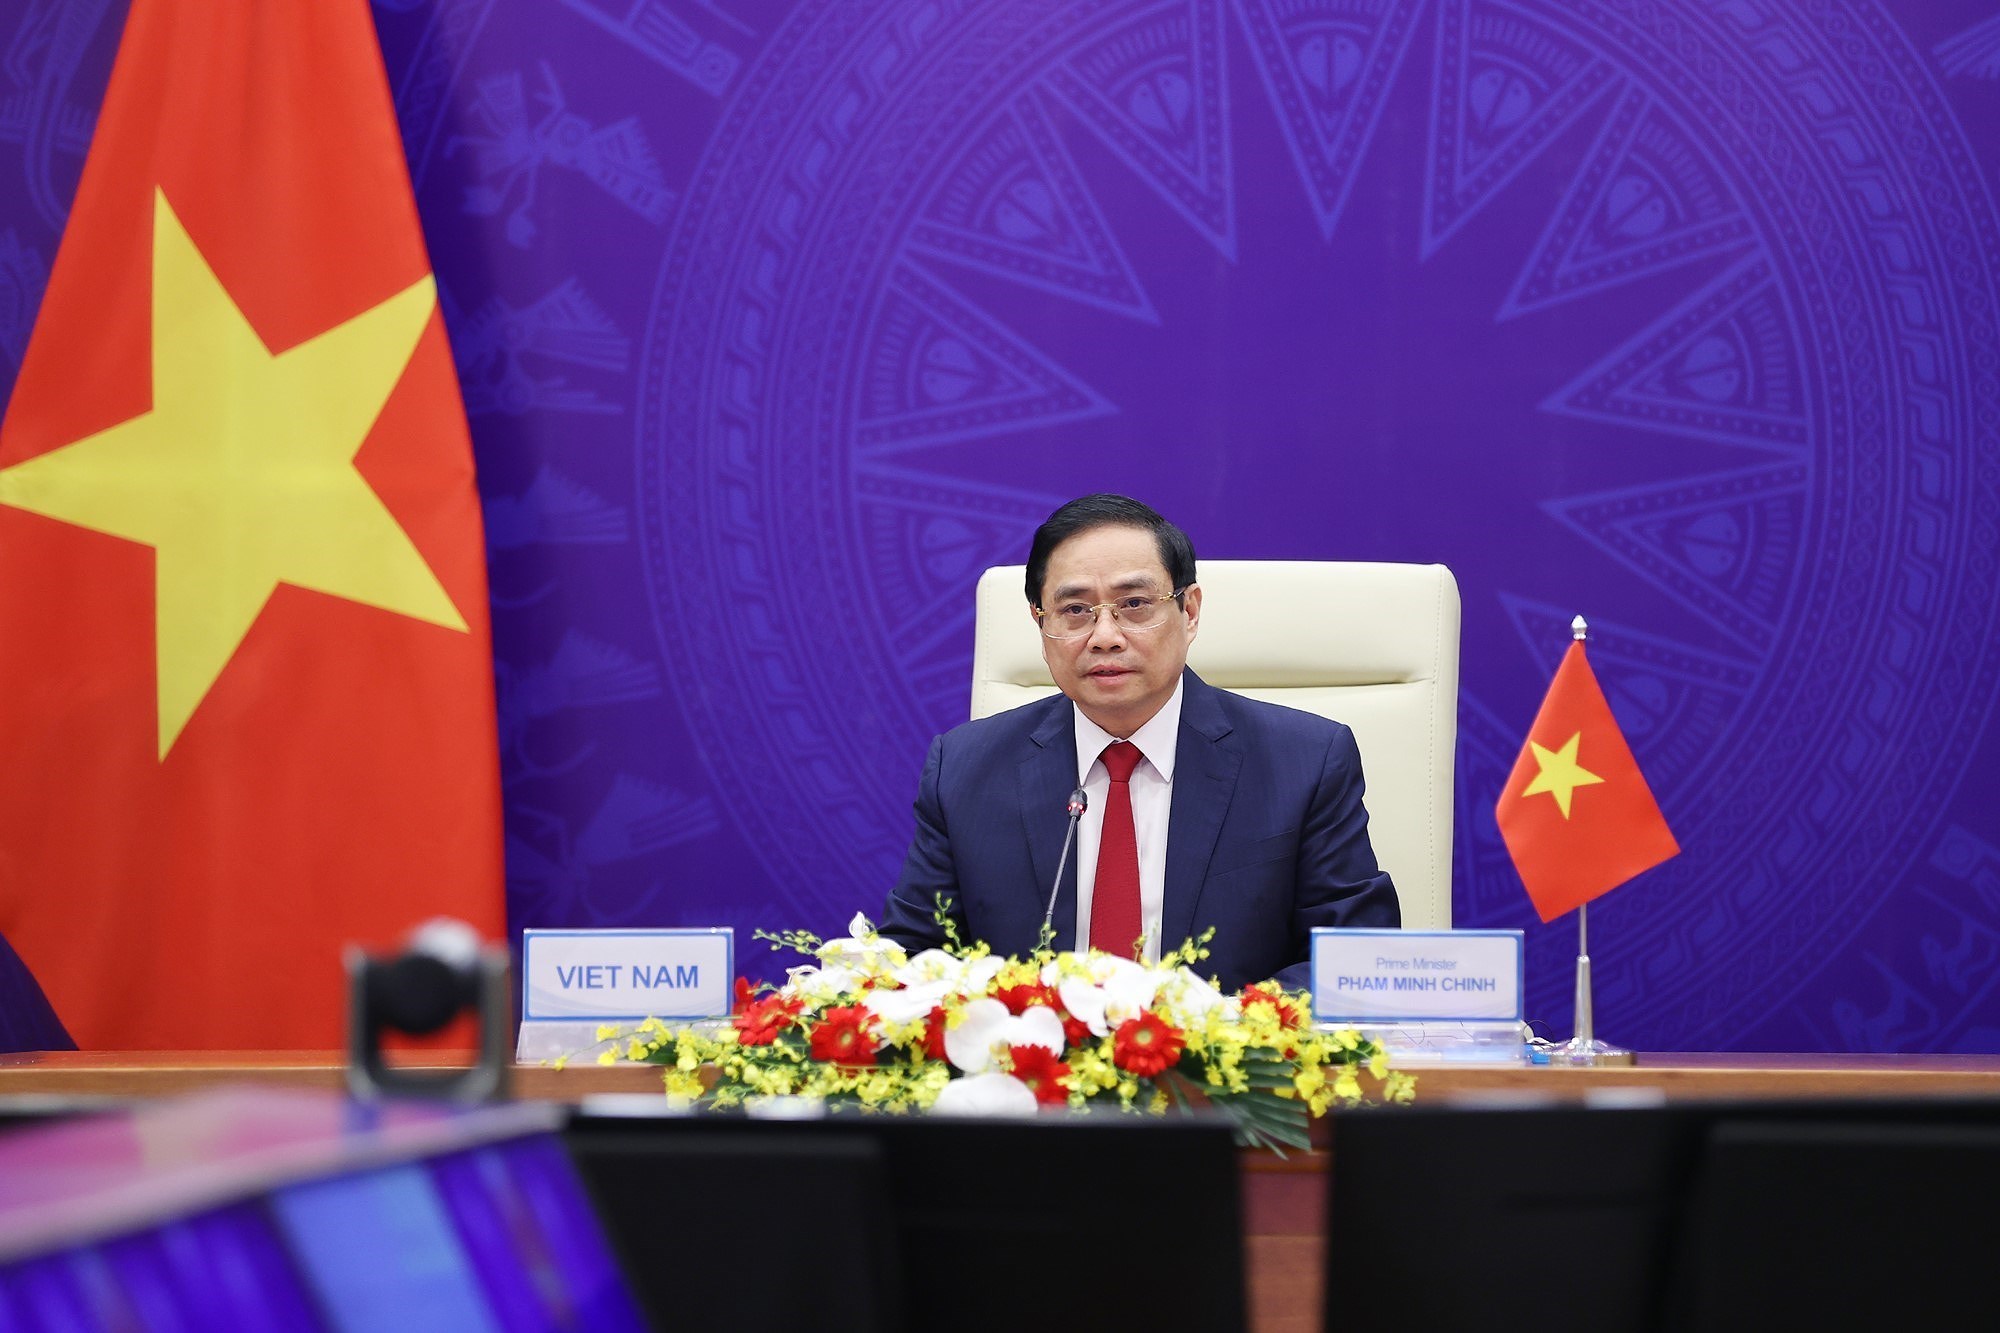 Remarks by Prime Minister Pham Minh Chinh at 26th International Conference on the Future of Asia hinh anh 1